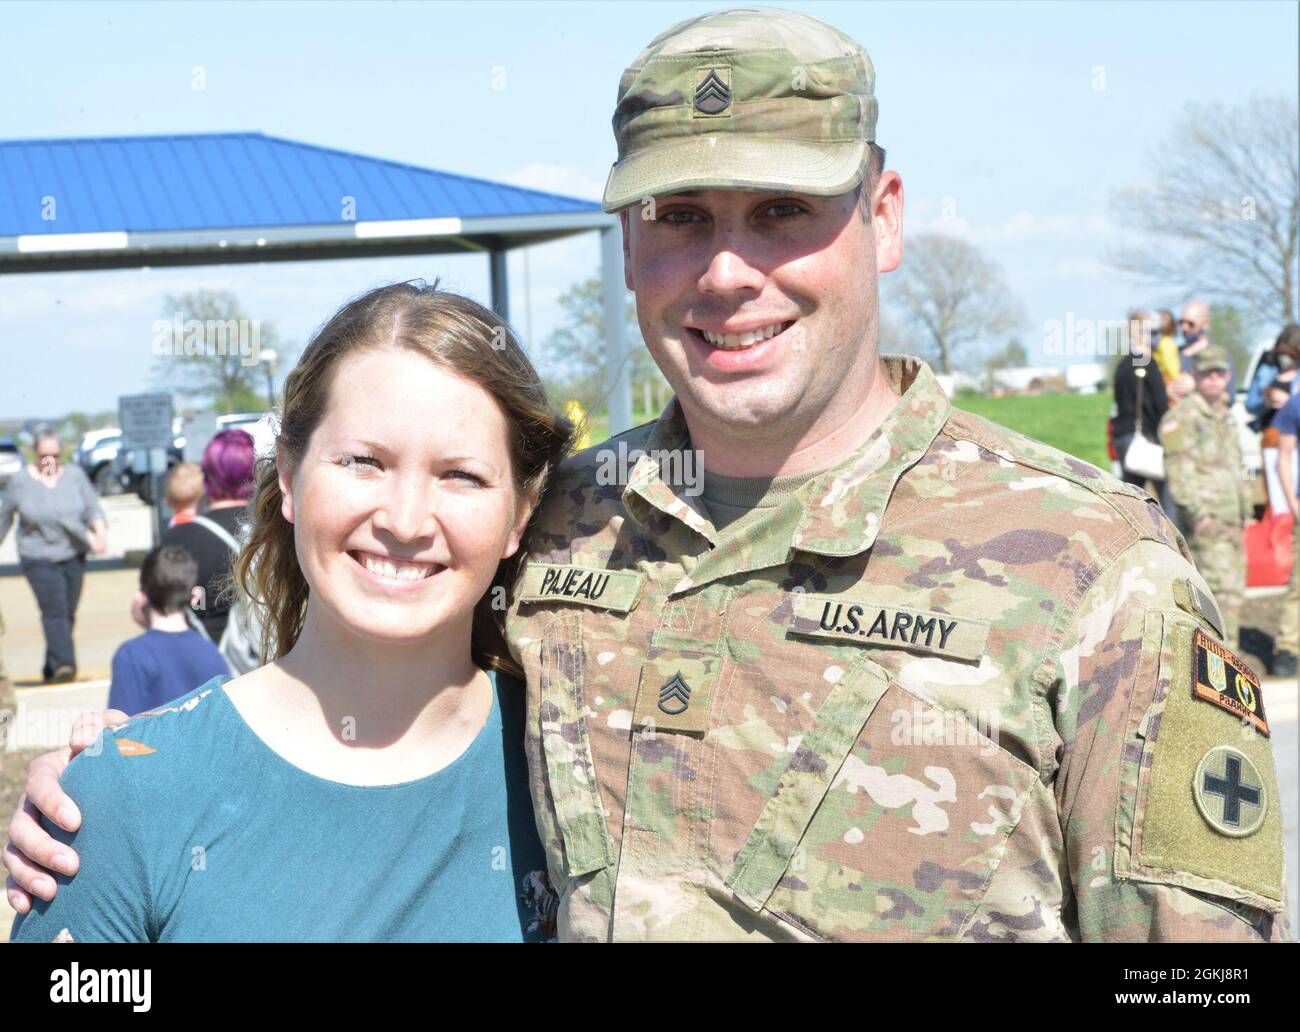 Capt. Amy Pajeau (left) and her husband, Staff Sgt. Benjamin Pajeau, are re-united after more than 15 months apart. The couple faced back-to-back deployments with Capt. Pajeau deploying prior to her husband, who returned Friday, April 30. About 165 Illinois Army National Guard Soldiers returned April 30 to Illinois after an 11-month deployment to Ukraine where the unit formed “Task Force Illini” as the command element of Joint Multinational Training Group-Ukraine, which is responsible for training, advising and mentoring the Ukrainian cadre at Combat Training Center-Yavoriv, Ukraine to improve Stock Photo